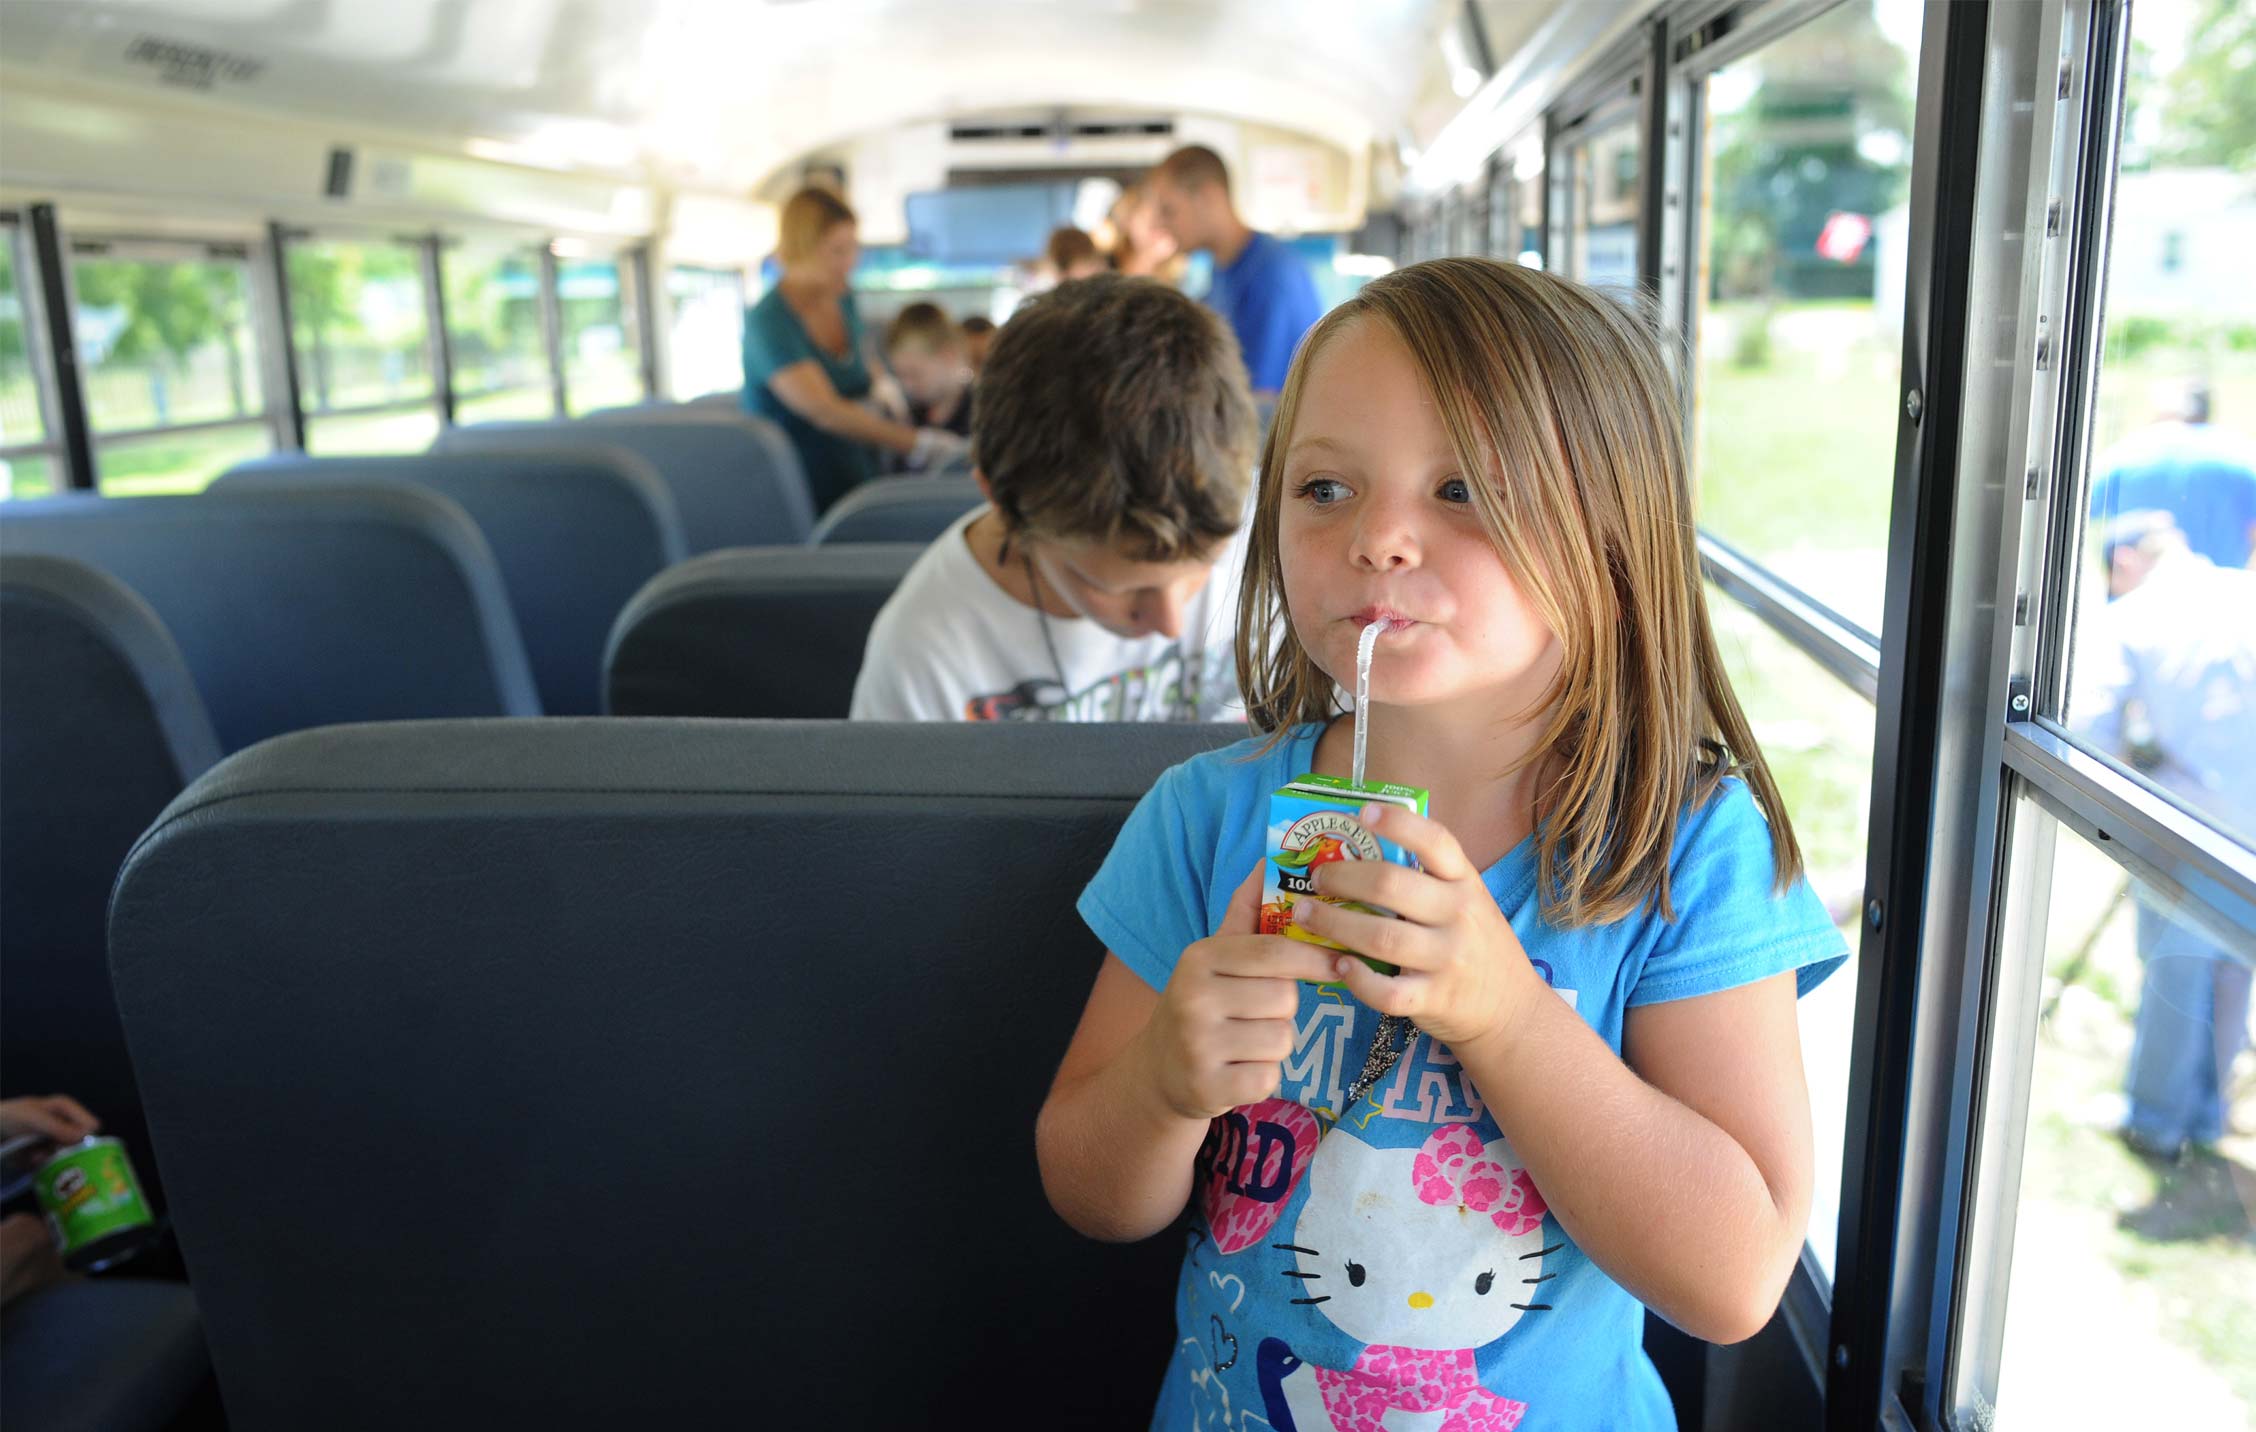 A young girl on a bus, stop summer slide 